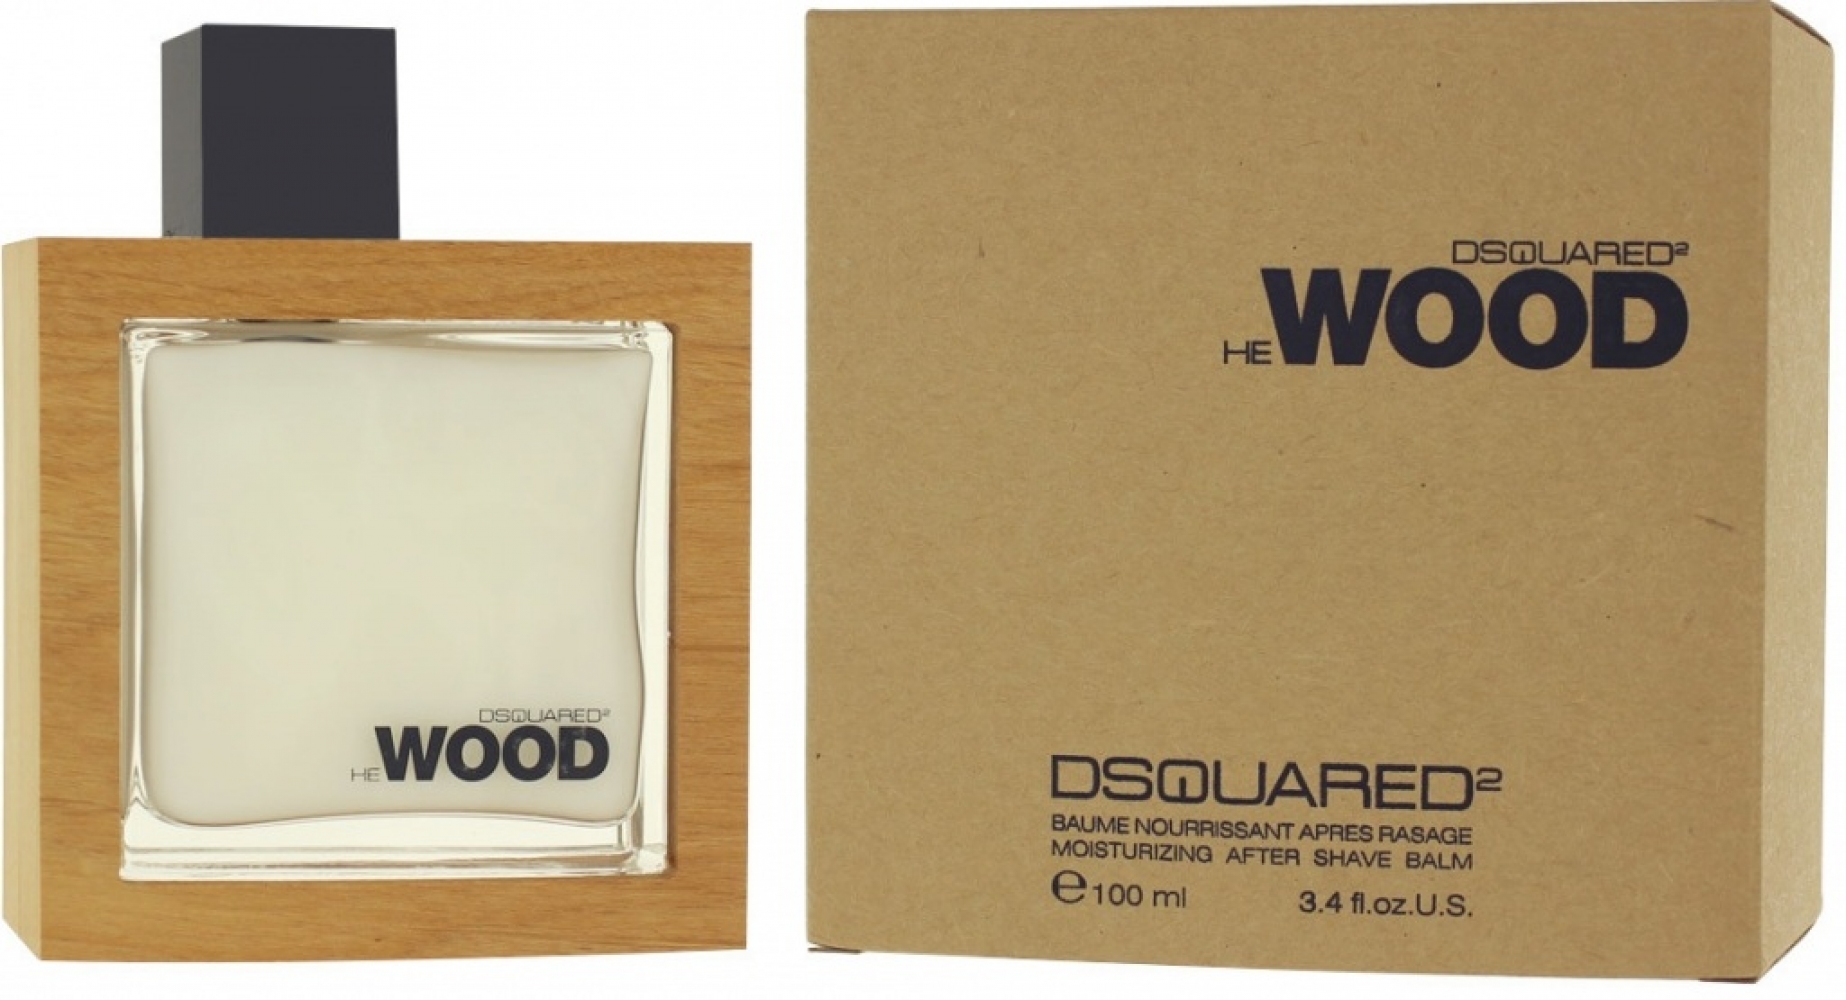 Dsquared2 He Wood After Shave Balm